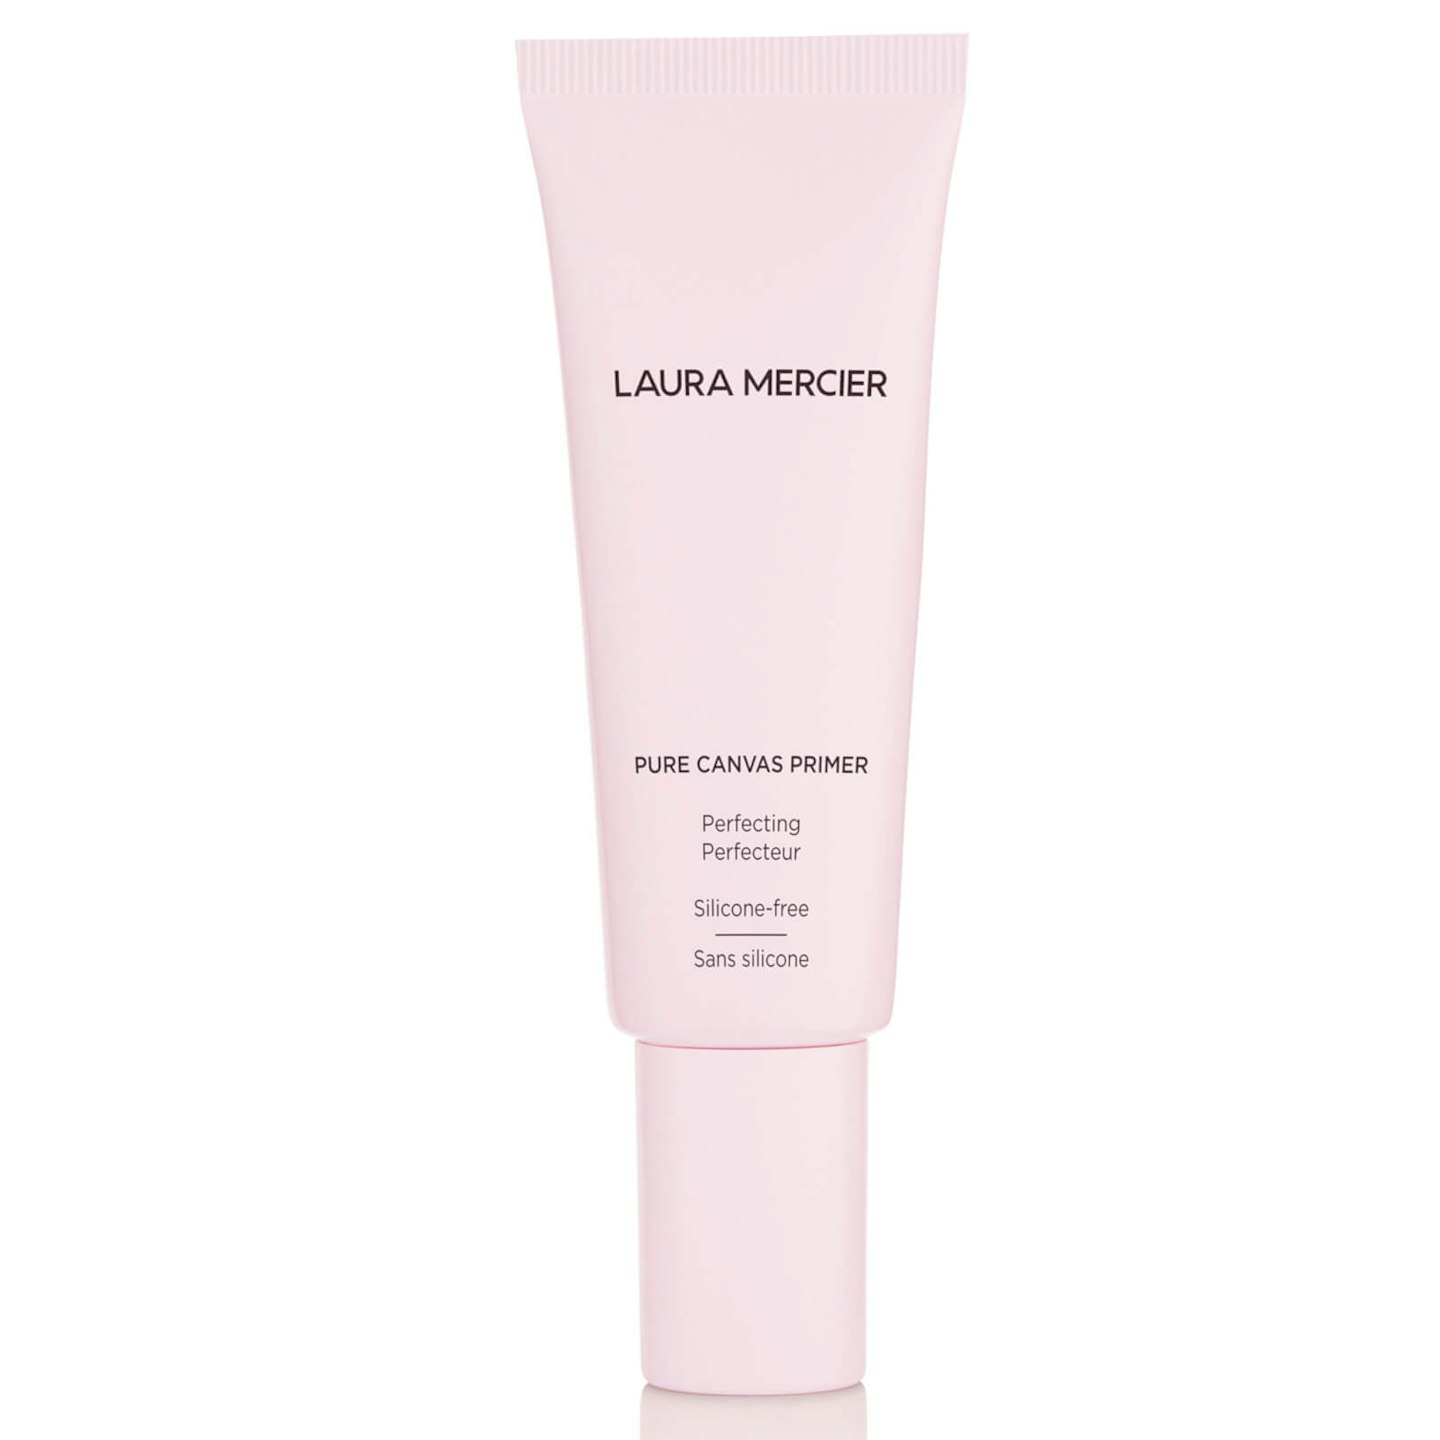 4 instalments of £8.00 with clearpay Learn more     6 weekly payments from £5.33 with laybuy Learn more  Laura Mercier Pure Canvas Perfecting Primer is the brandu2019s original flawless-skin formula, designed to keep makeup in place for longer with a smoother, seamless finish. Helping you look after and prepare your face like a canvas, Laura Mercieru2019s primer not only improves the appearance of your skin on the surface, but contains nourishing ingredients full of goodness as well.  Enriched with antioxidant rich Green Tea Extract as well as Vitamin C, over time your complexion will be treated to a more youthful looking glow with a brighter, more even tone. Lightweight and water-based, the primer easily glides over skin and absorbs quickly, leaving behind no greasy residues for an instantly natural look.  Paraben, sulphate and fragrance-free. Brand: Laura Mercier Directions:  Apply after skincare. Gently massage a dime-sized amount onto skin with fingertips. Follow with Tinted Moisturiser or Foundation. Ingredients:  Water/Aqua/Eau, Tridecyl Neopentanoate, Cetyl Alcohol, Glycine Soja (Soybean) Oil, Aloe Barbadensis Leaf Juice, Vitis Vinifera (Grape) Fruit Extract, Citrus Aurantium Dulcis (Orange) Peel Extract, Mel Extract/Honey Extract/ Extrait De Miel, Actinidia Chinensis (Kiwi) Fruit Extract, Rose Extract, Pelargonium Graveolens Extract, Camellia Sinensis Leaf Extract, Rubus Idaeus (Raspberry) Fruit Extract, Glycerin, Ascorbyl Palmitate, Allantoin, Tocopherol, Glyceryl Stearate, Caprylyl Glycol, Lanolin, Stearic Acid, Triethanolamine, Carbomer, Polymethyl Methacrylate, Butylene Glycol, Citric Acid, Sodium Sulfite, Linalool, Geraniol, Limonene, Phenoxyethanol, Sodium Benzoate, Potassium Sorbate. May Contain/Peut Contenir/(+/-): Red 4 (Ci 14700), Yellow 5 (Ci 19140). Volume: 50ml Laura Mercier Pure Canvas Perfecting Primer, £30